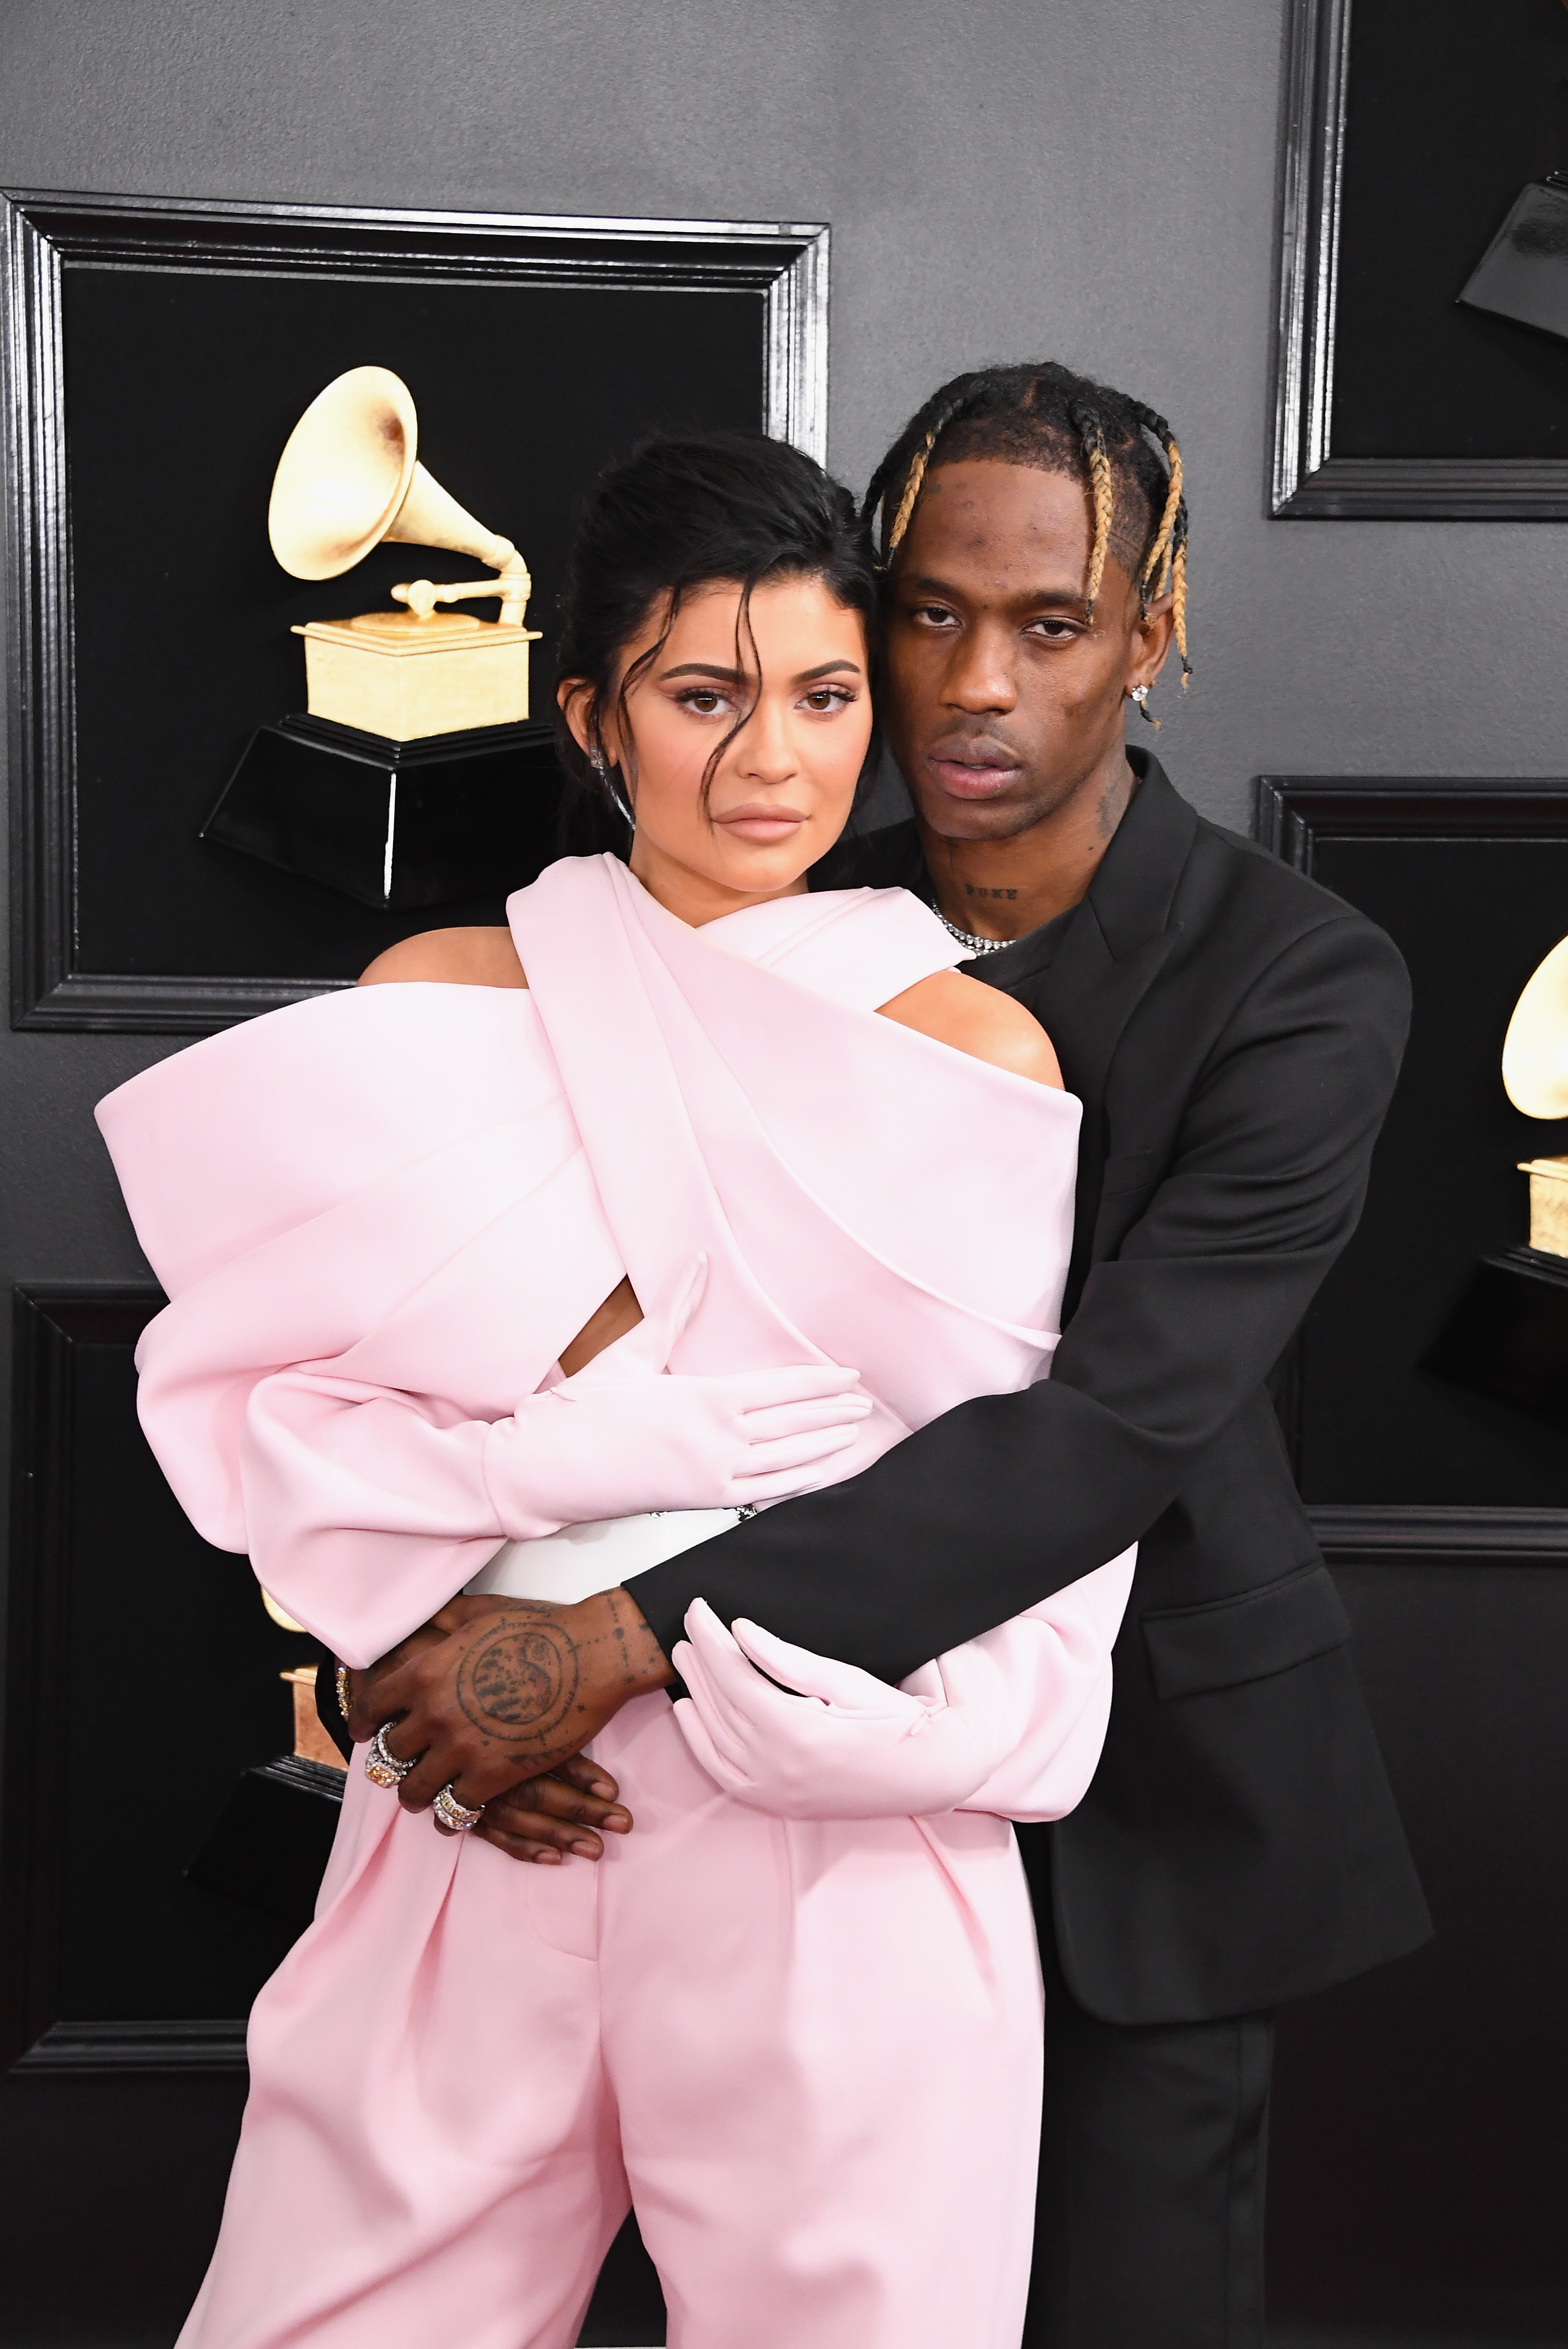 Travis Scott and Kylie Jenner attend the 61st Annual Grammy Awards in Los Angeles, California, in 2019